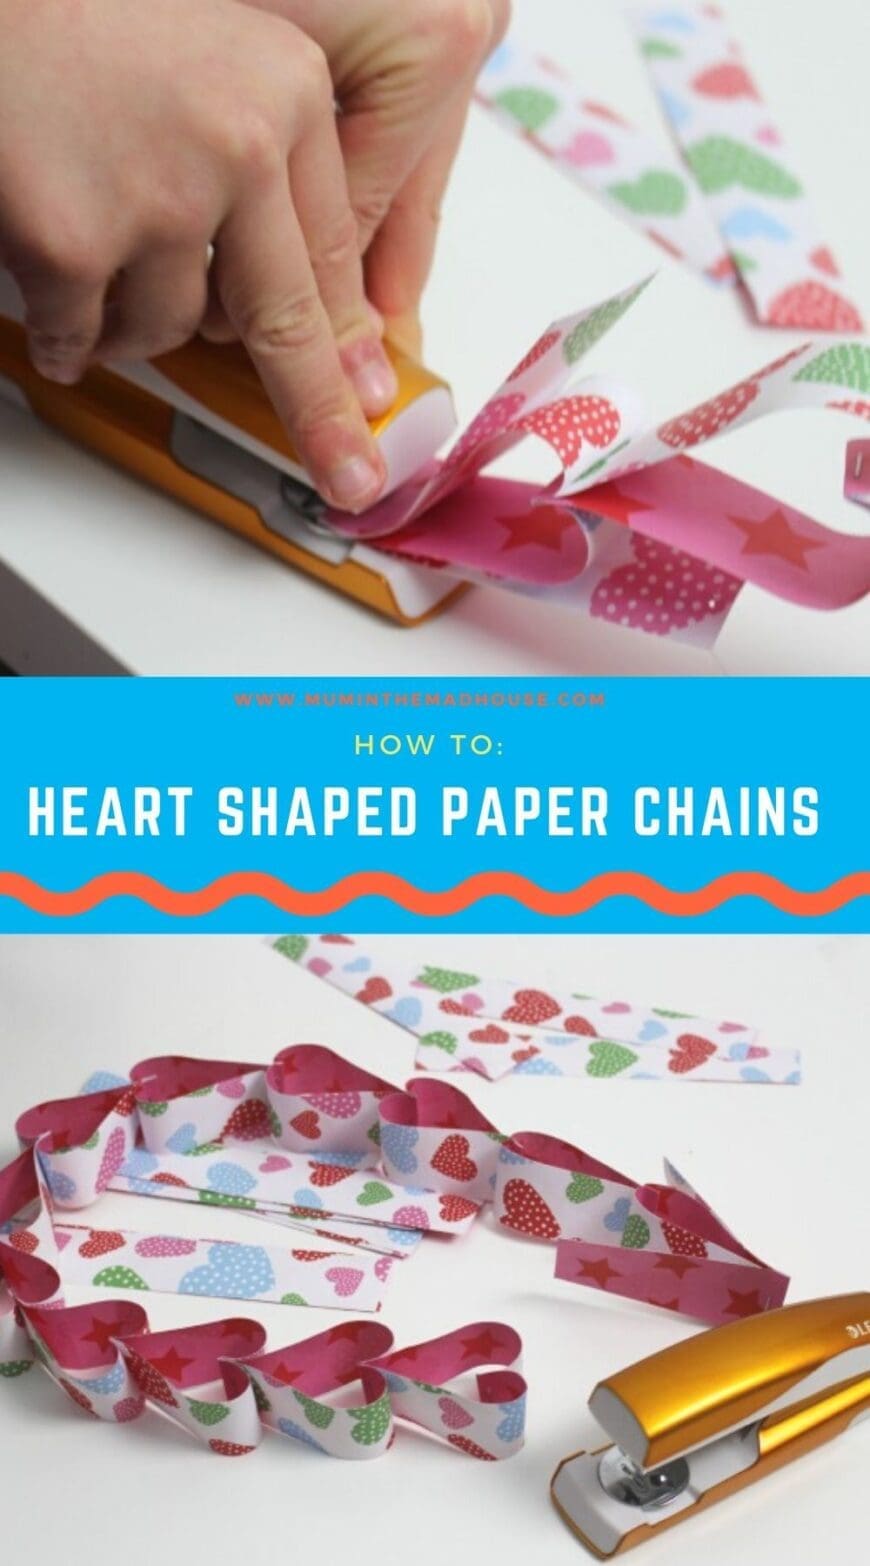 This sweet and simple heart-shaped paper chain is perfect for Valentine's Day, mostly because it's made with items you likely have hanging around the house.